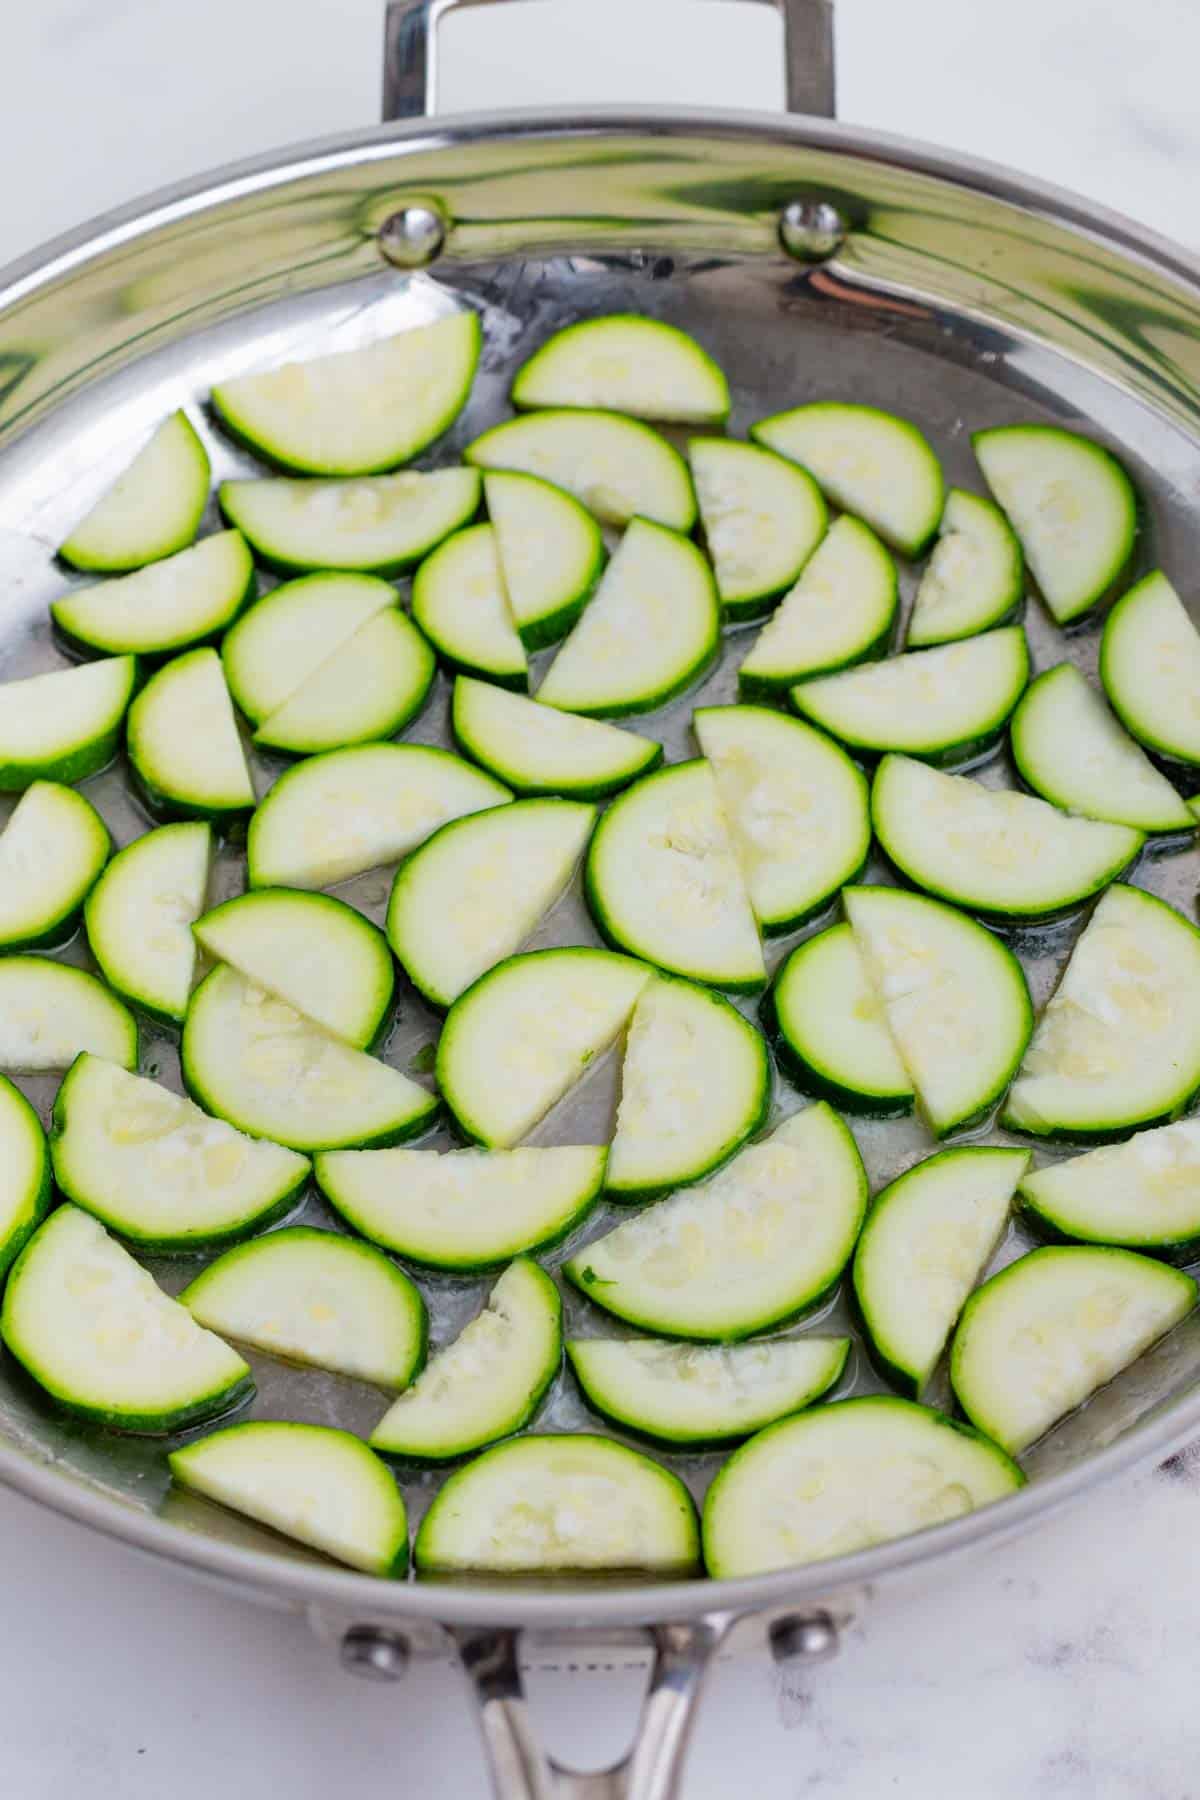 Sliced zucchini is added to a hot skillet.